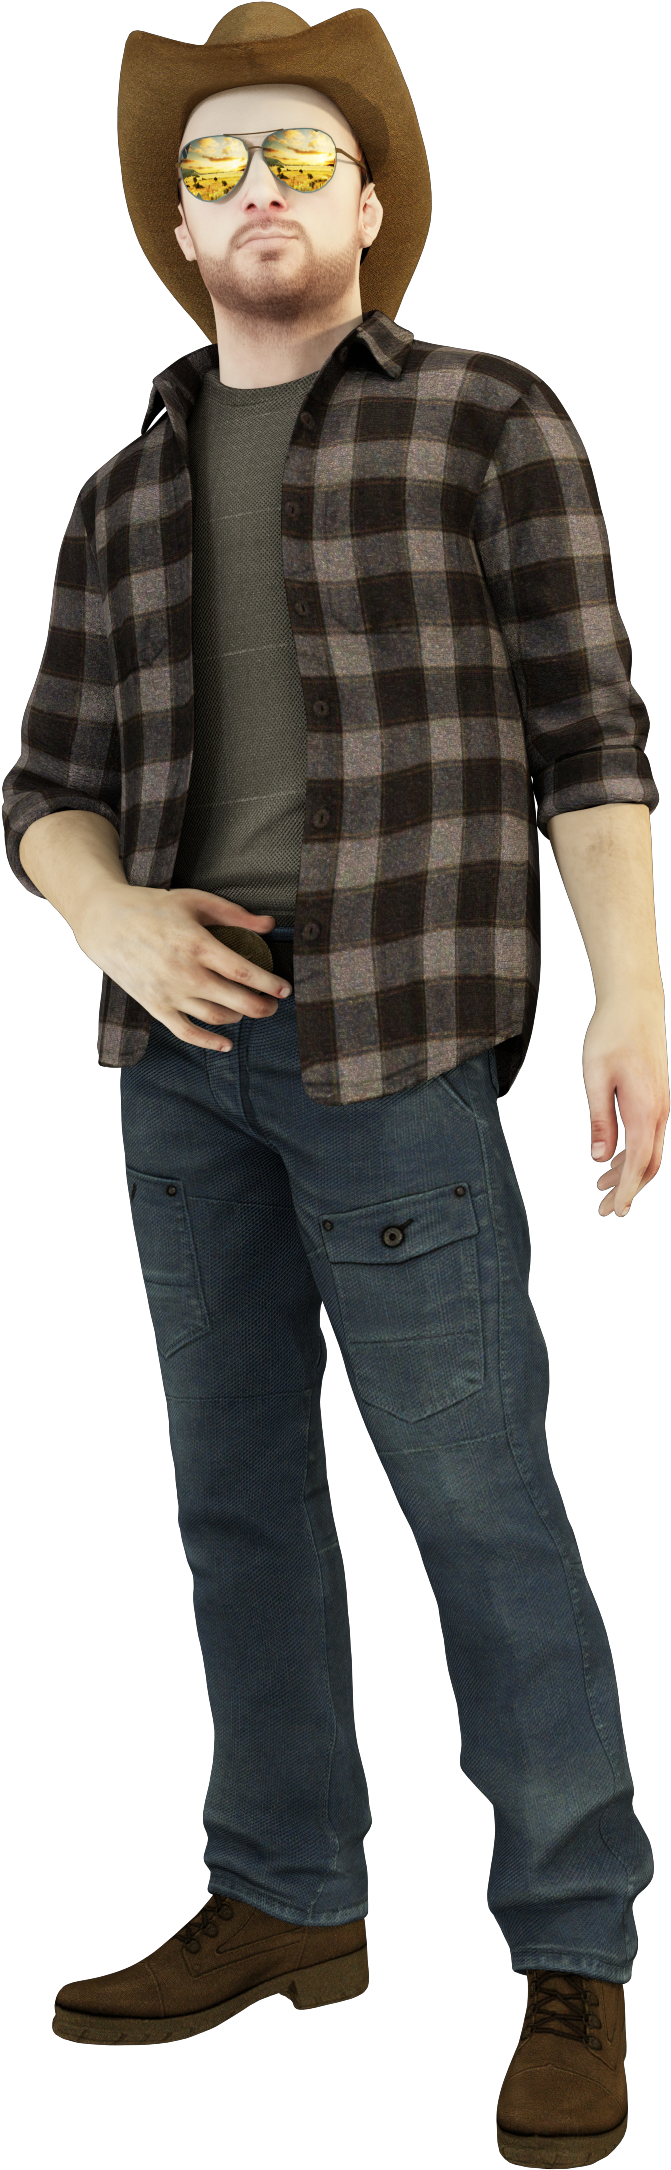 A Man Wearing A Plaid Shirt And Jeans